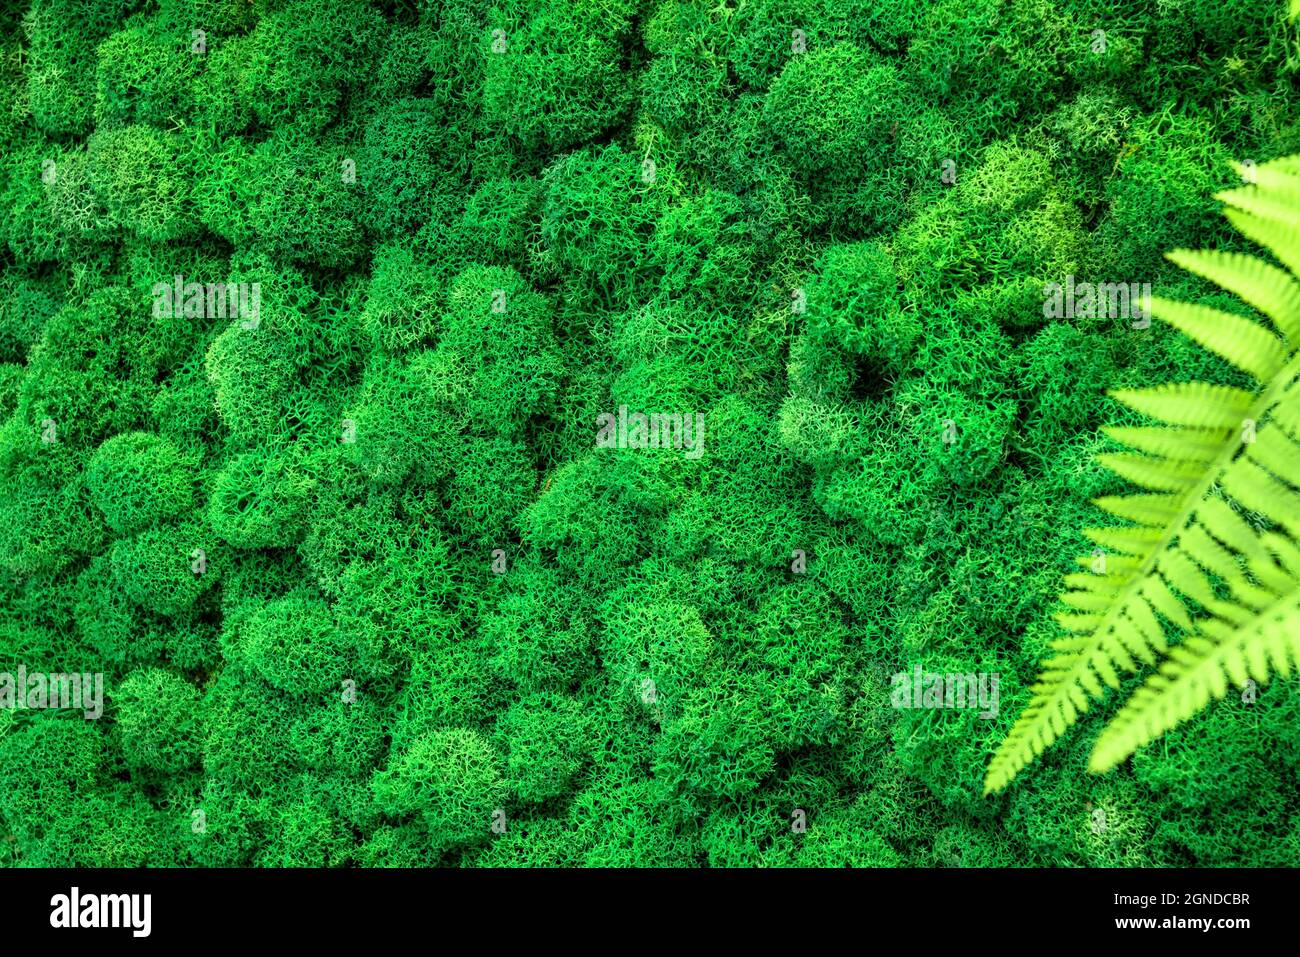 Moss background, detail of vertical garden as house interior decor. Green reindeer plant on office or home wall, lichen texture closeup. Concept of na Stock Photo